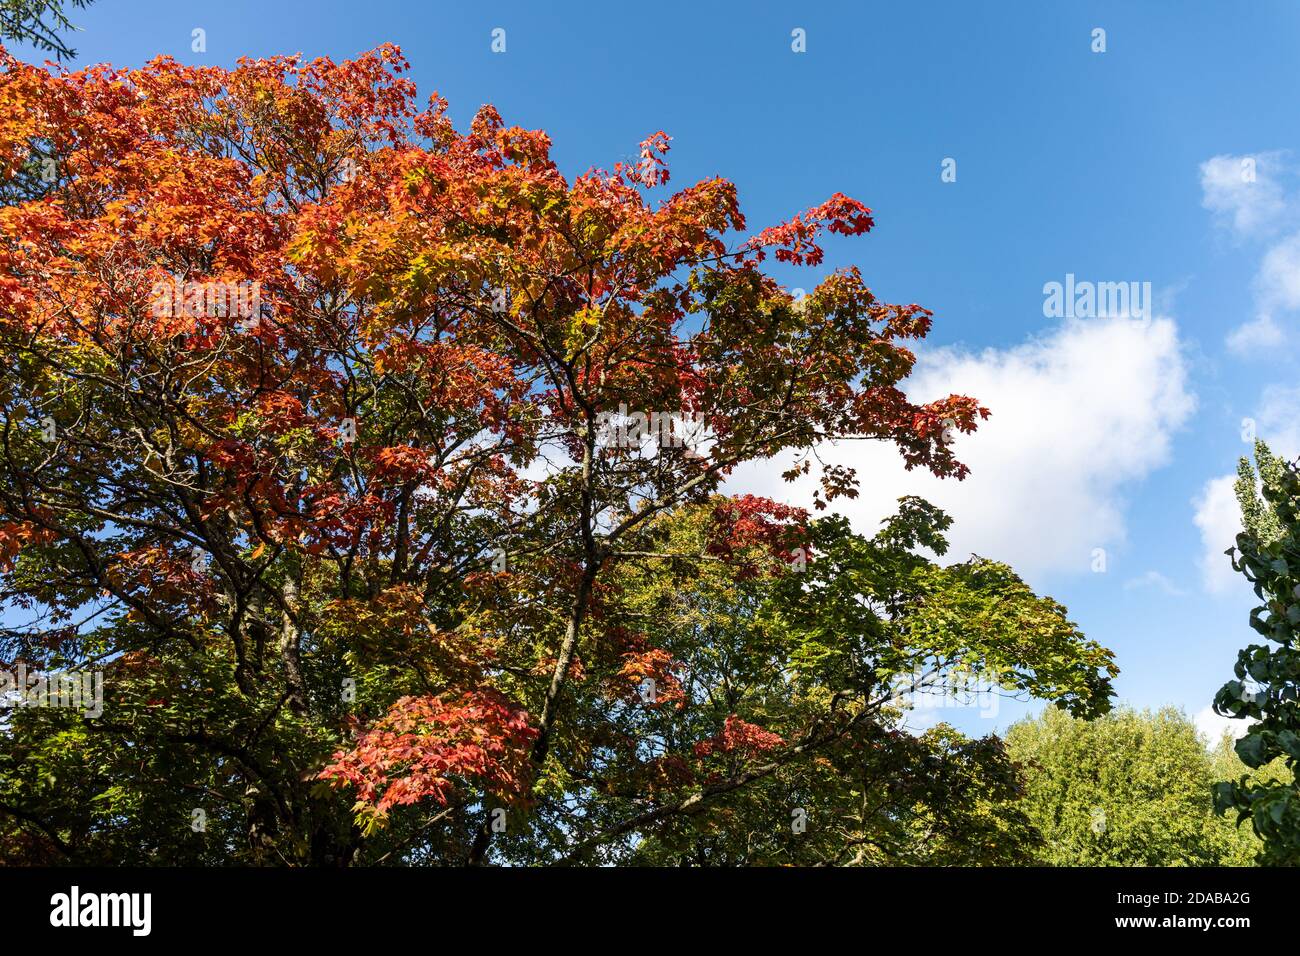 Early autumn colors against blue sky Stock Photo